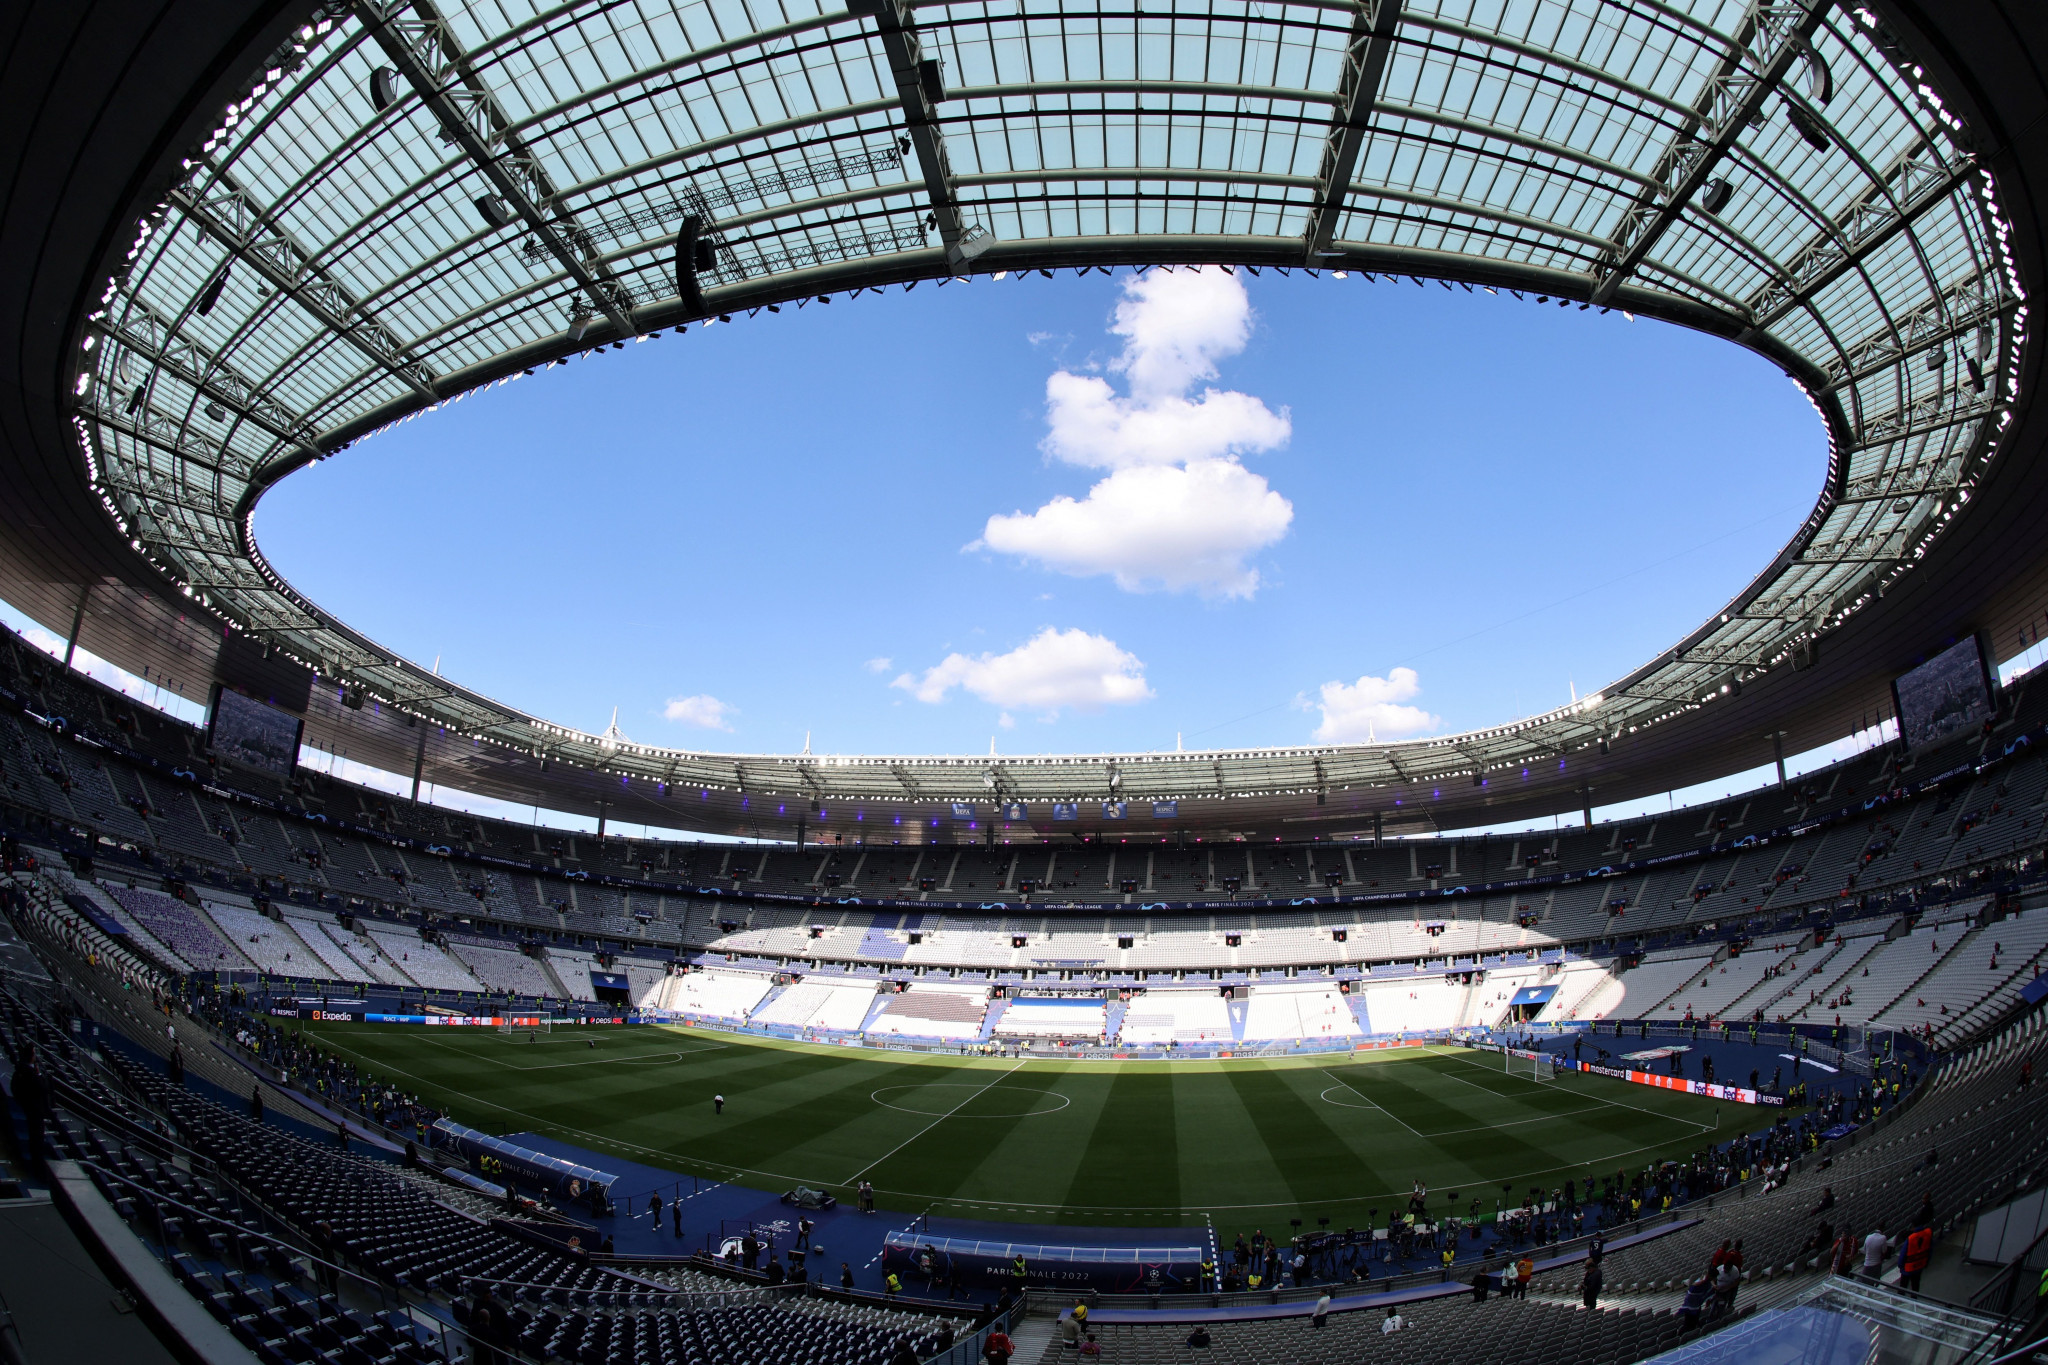 The Stade de France was originally built for the 1998 FIFA World Cup ©Getty Images